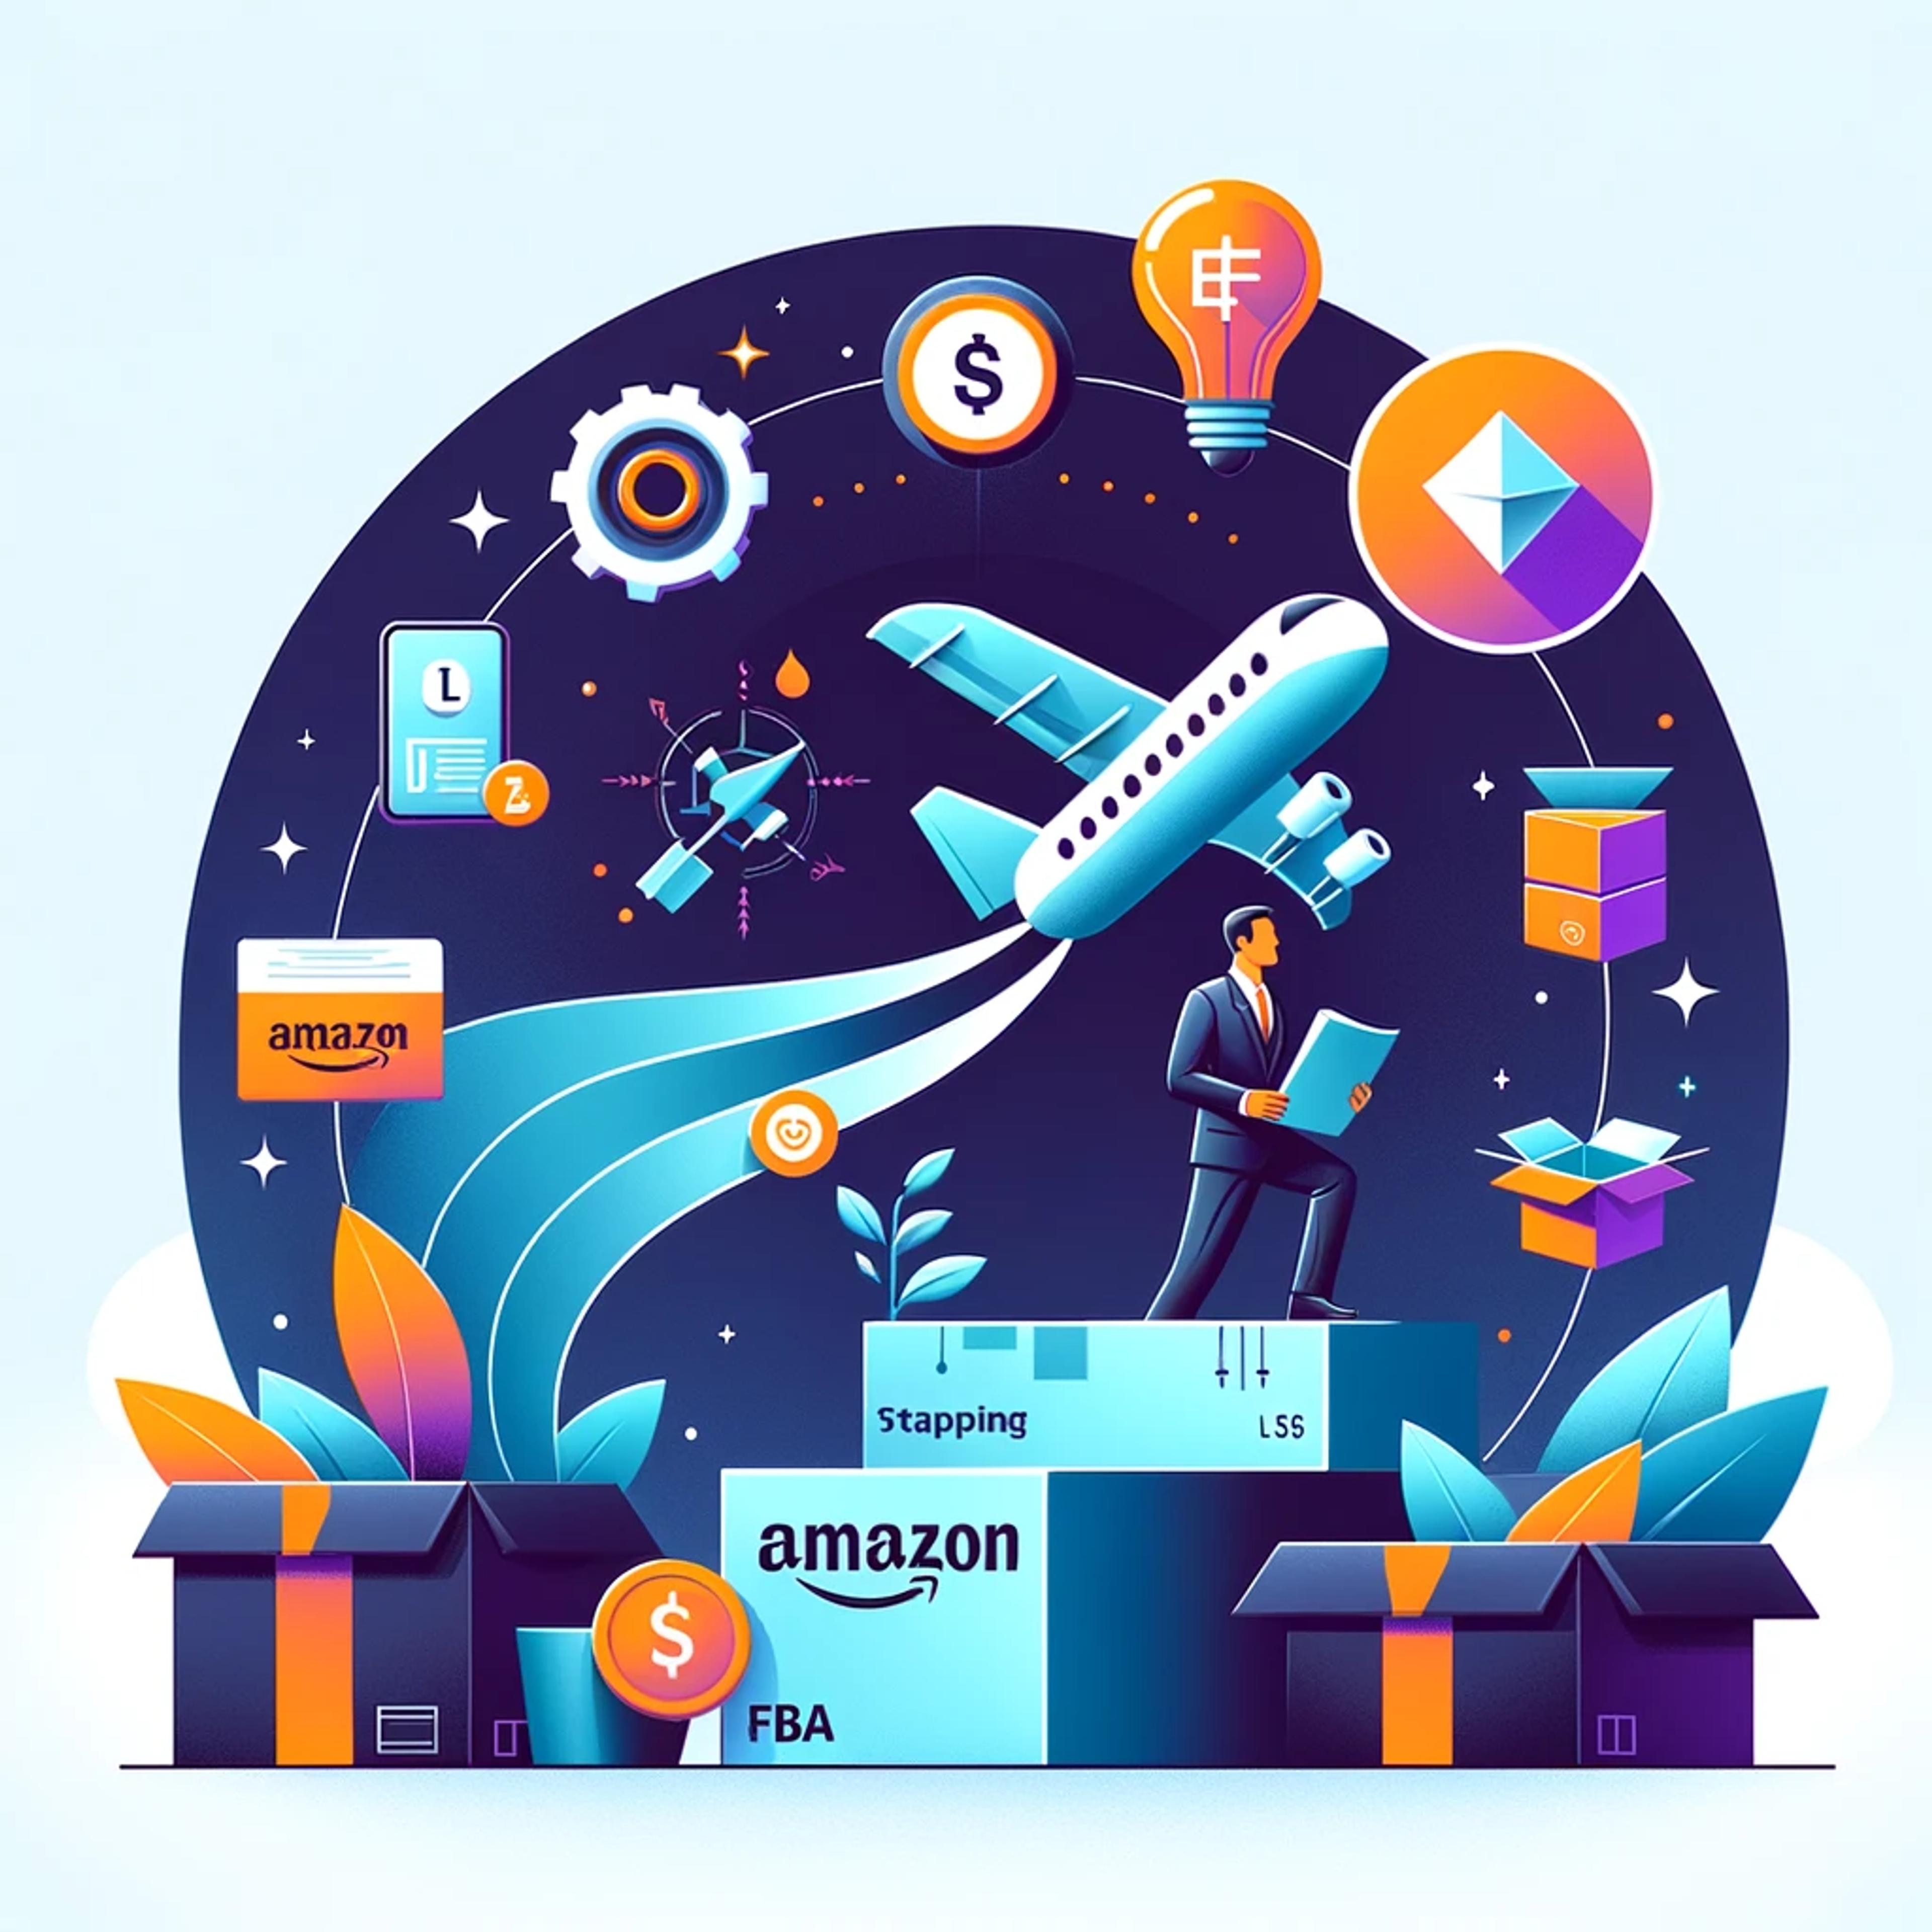 Animated illustration of the launching steps of an Amazon FBA business